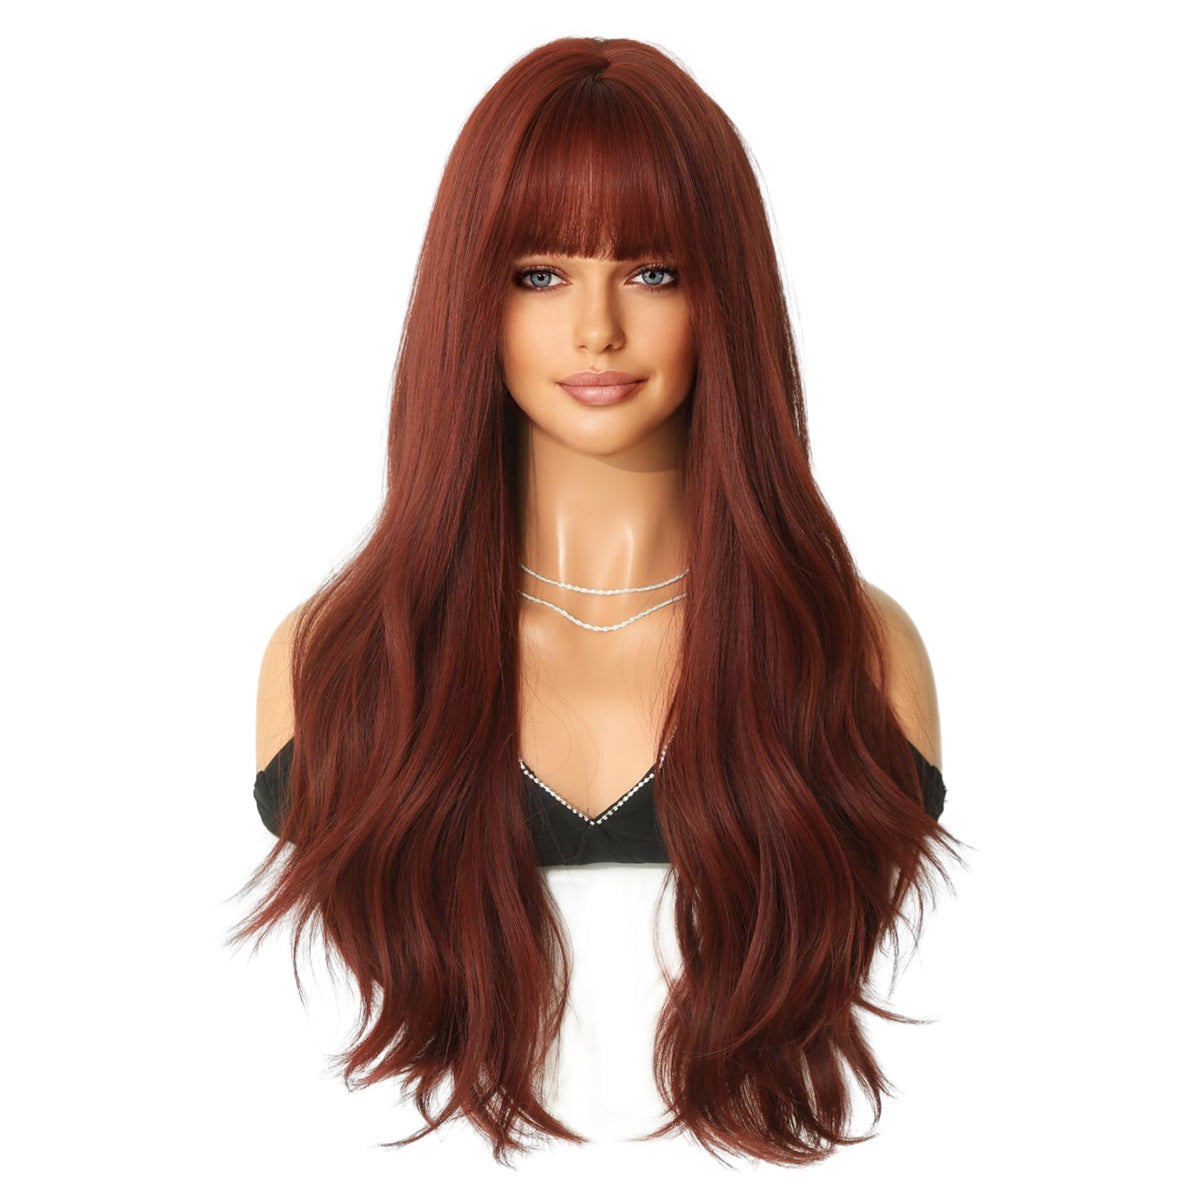 Long Curly Hair Wine Red Wig Cover Party Ball